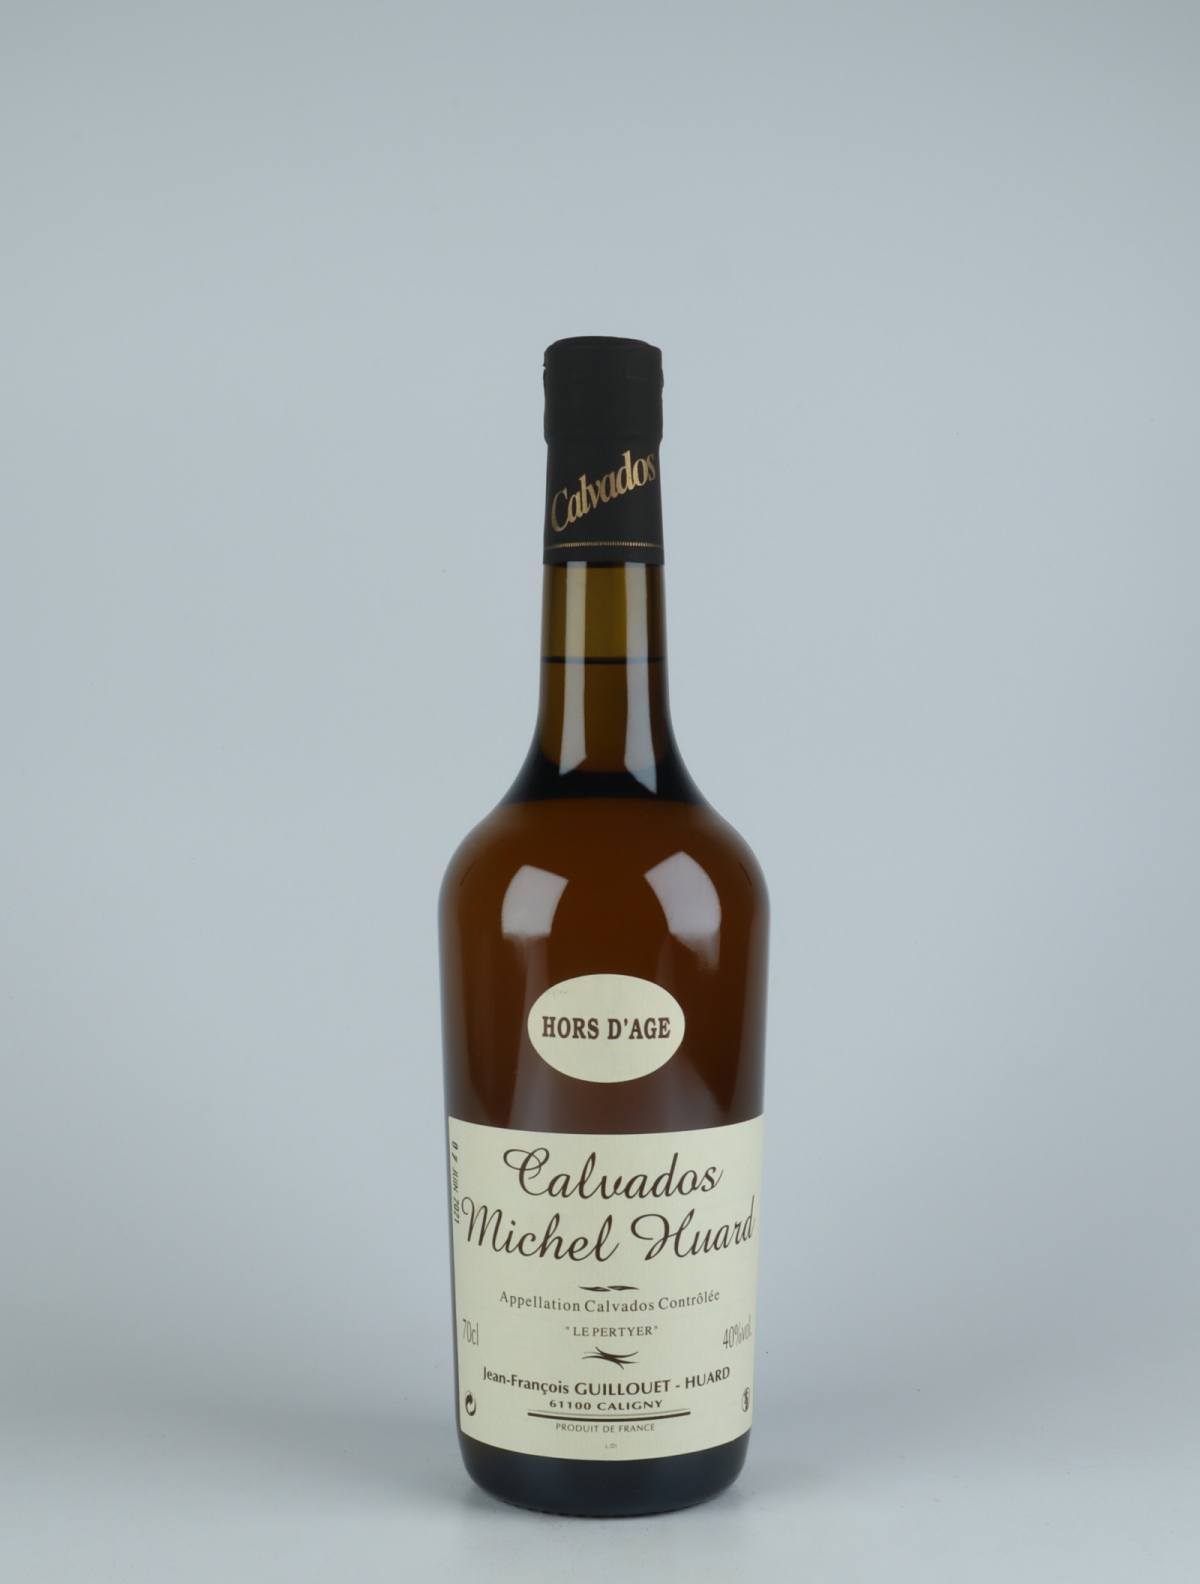 A bottle N.V. Hors d'Age Calvados Spirits from Michel Huard, Normandy in France